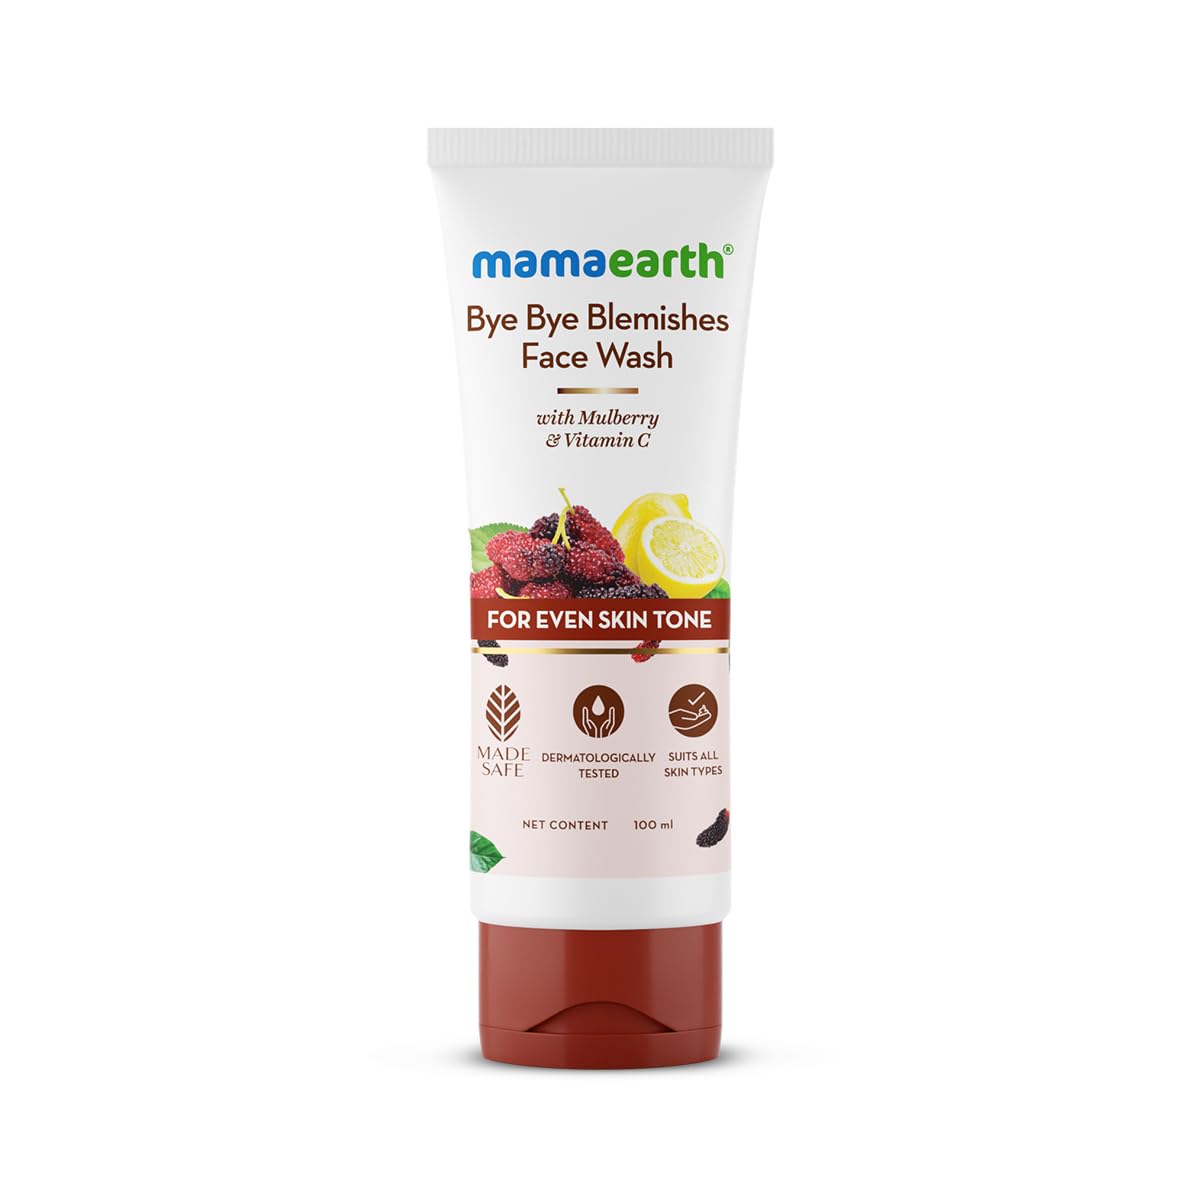 Mamaearth Bye Bye Blemishes Face Wash with Mulberry and Vitamin C for Even Skin Tone - 100 ml Gently Cleanses | Reduces Dark Spots | Brightens Skin | Reduces Pigmentation | Niacinamide